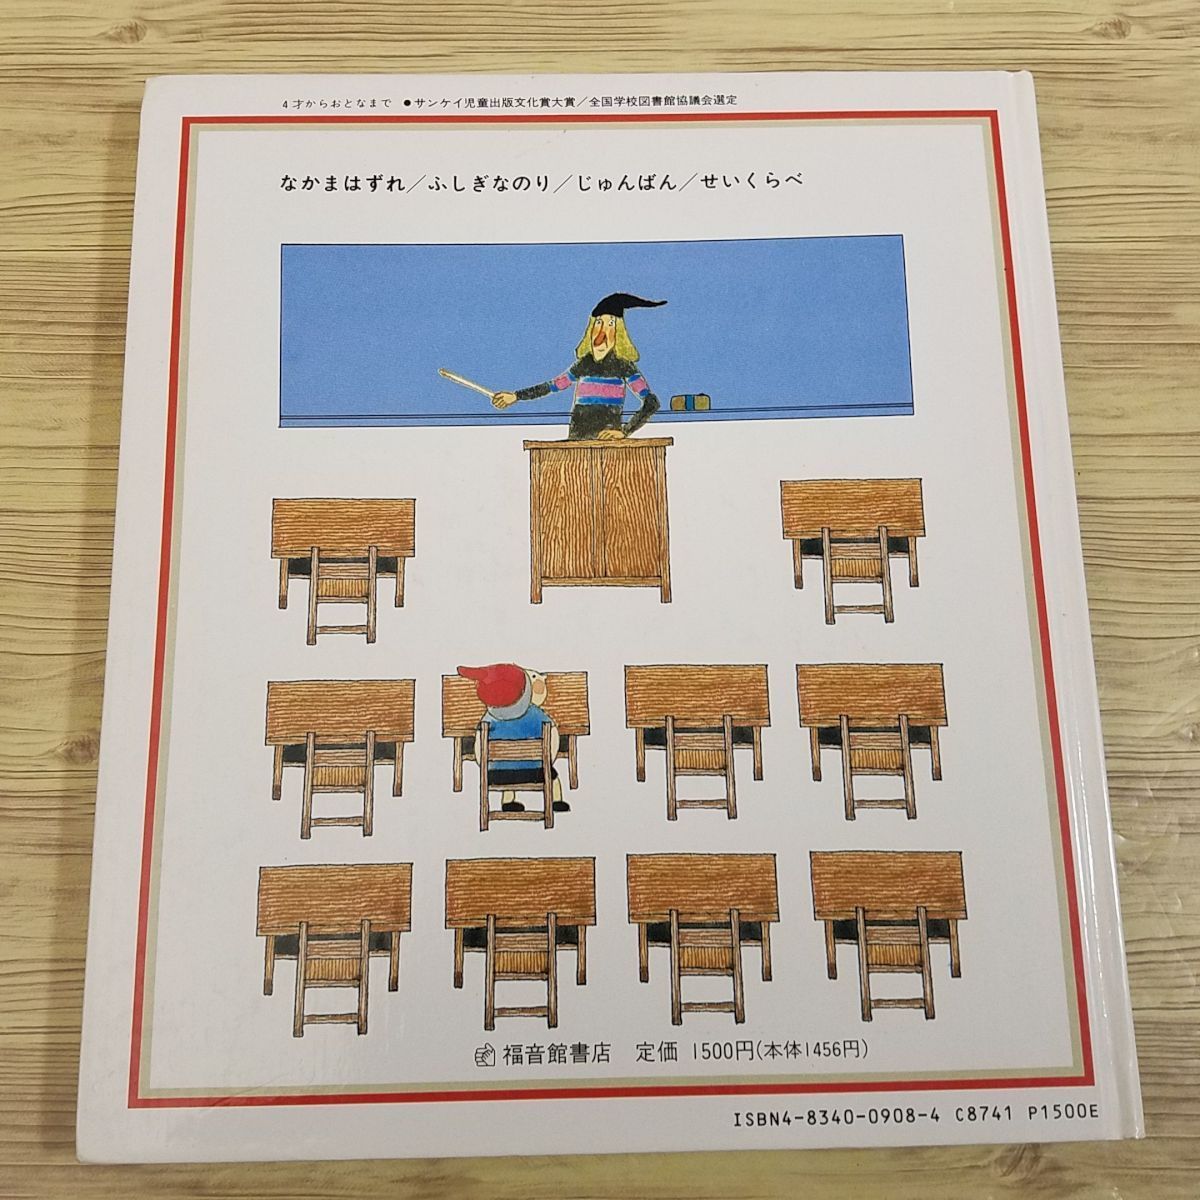  intellectual training picture book [ start ... light .... picture book 1( cover less )] luck sound pavilion bookstore cheap . light .